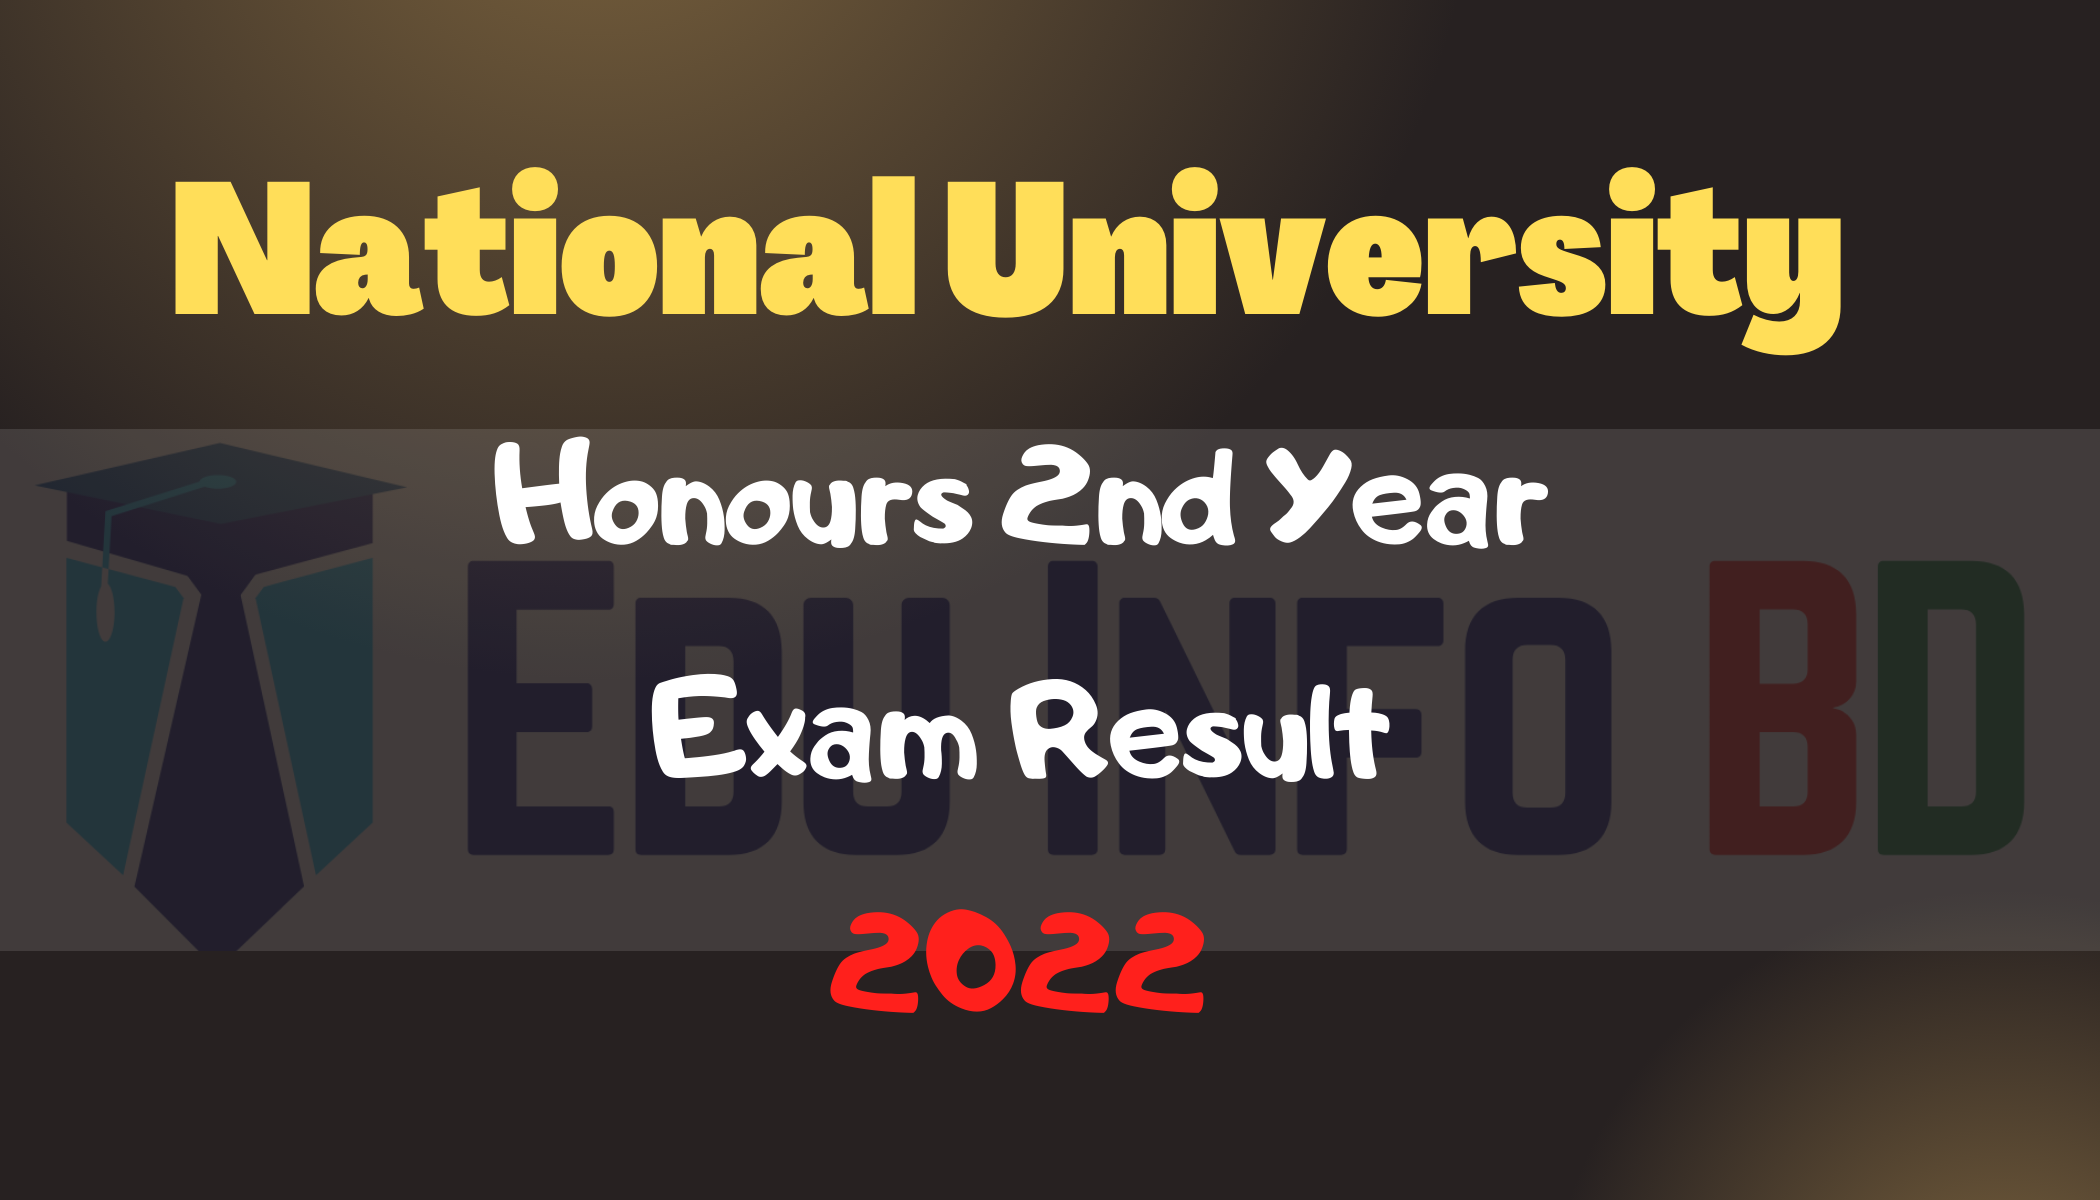 Honours 2nd Year Exam Result 2022